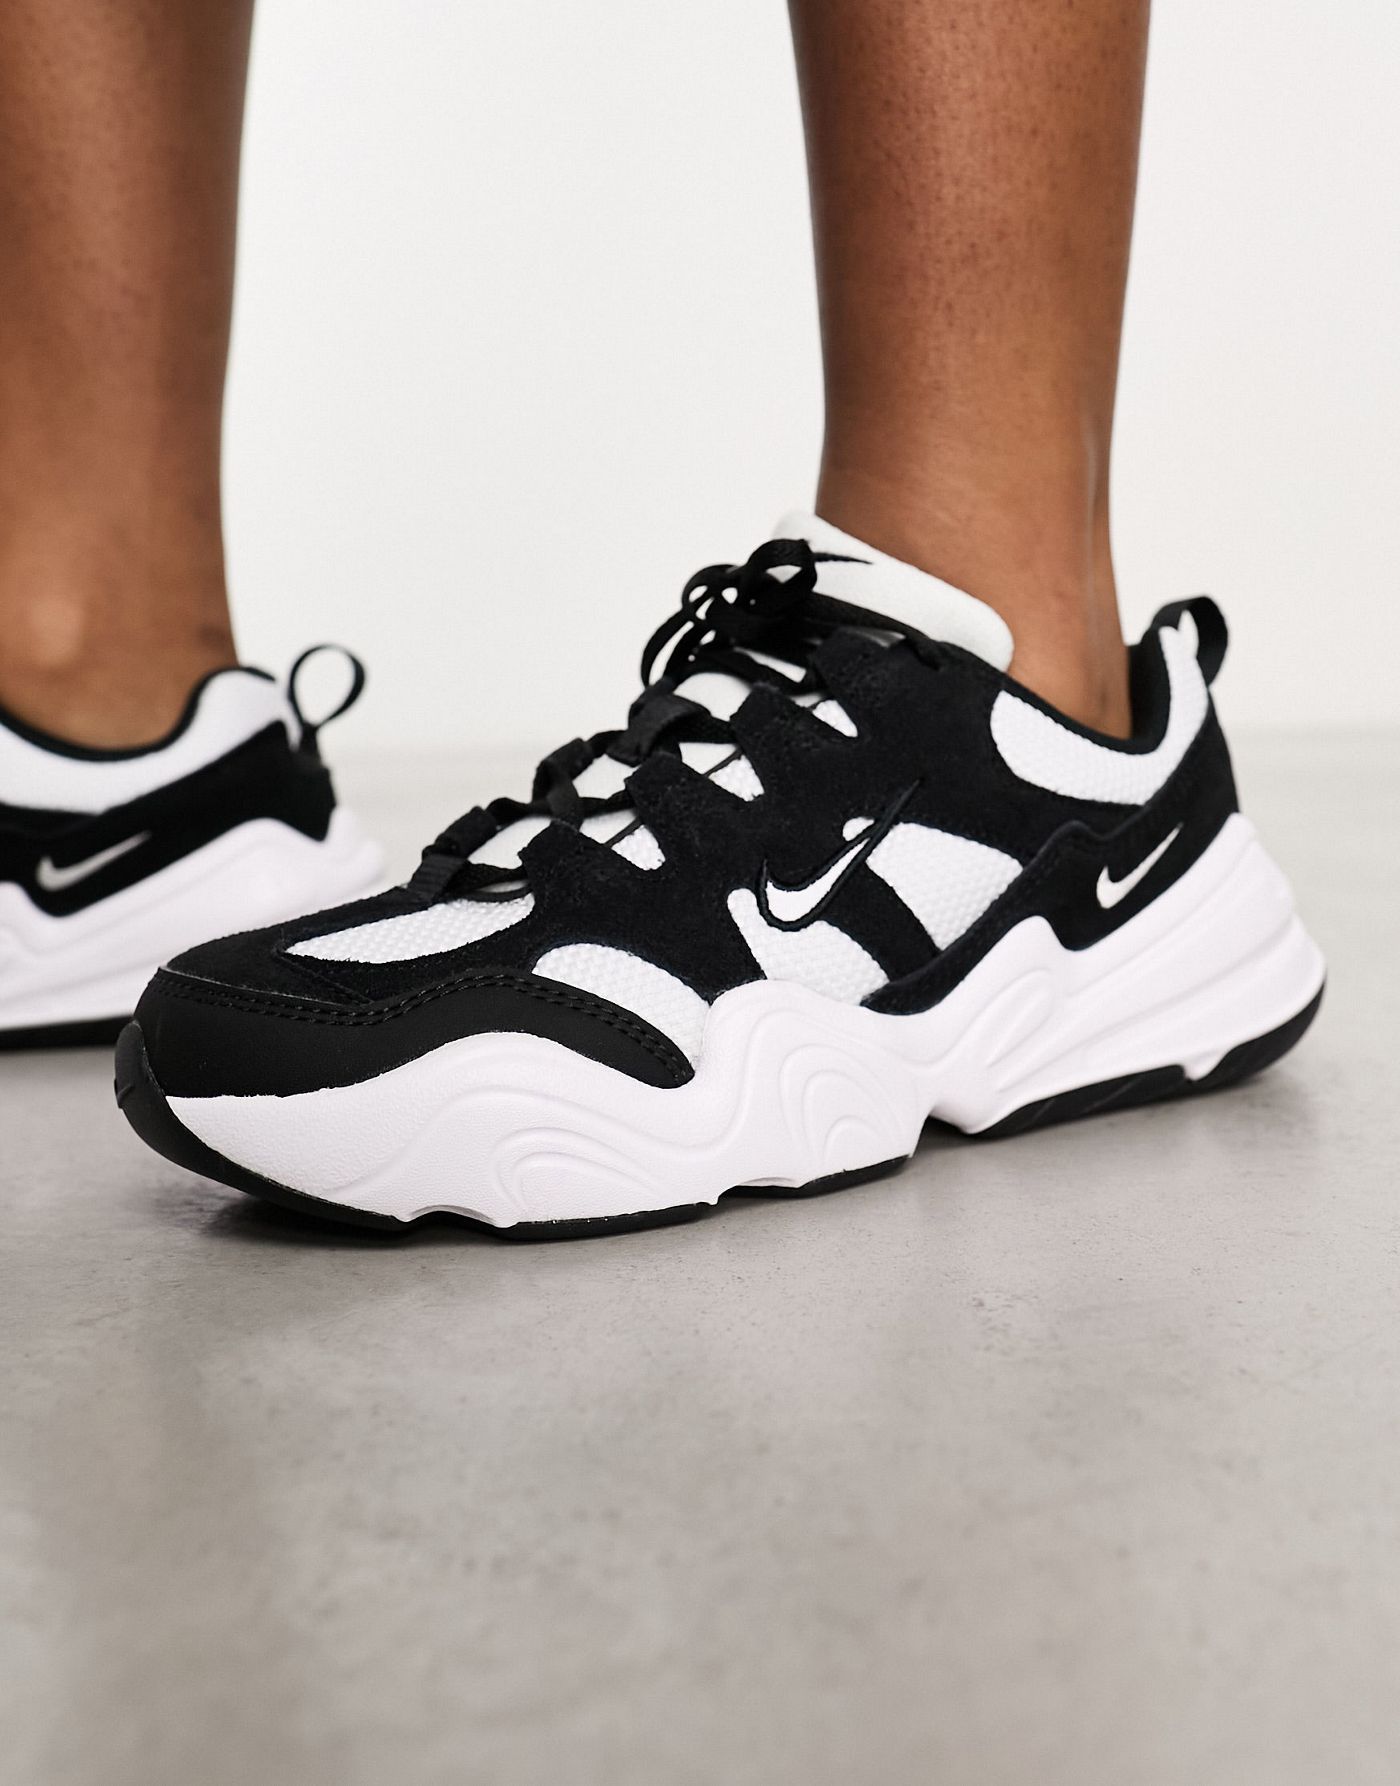 Nike Tech Hera trainers in white and black